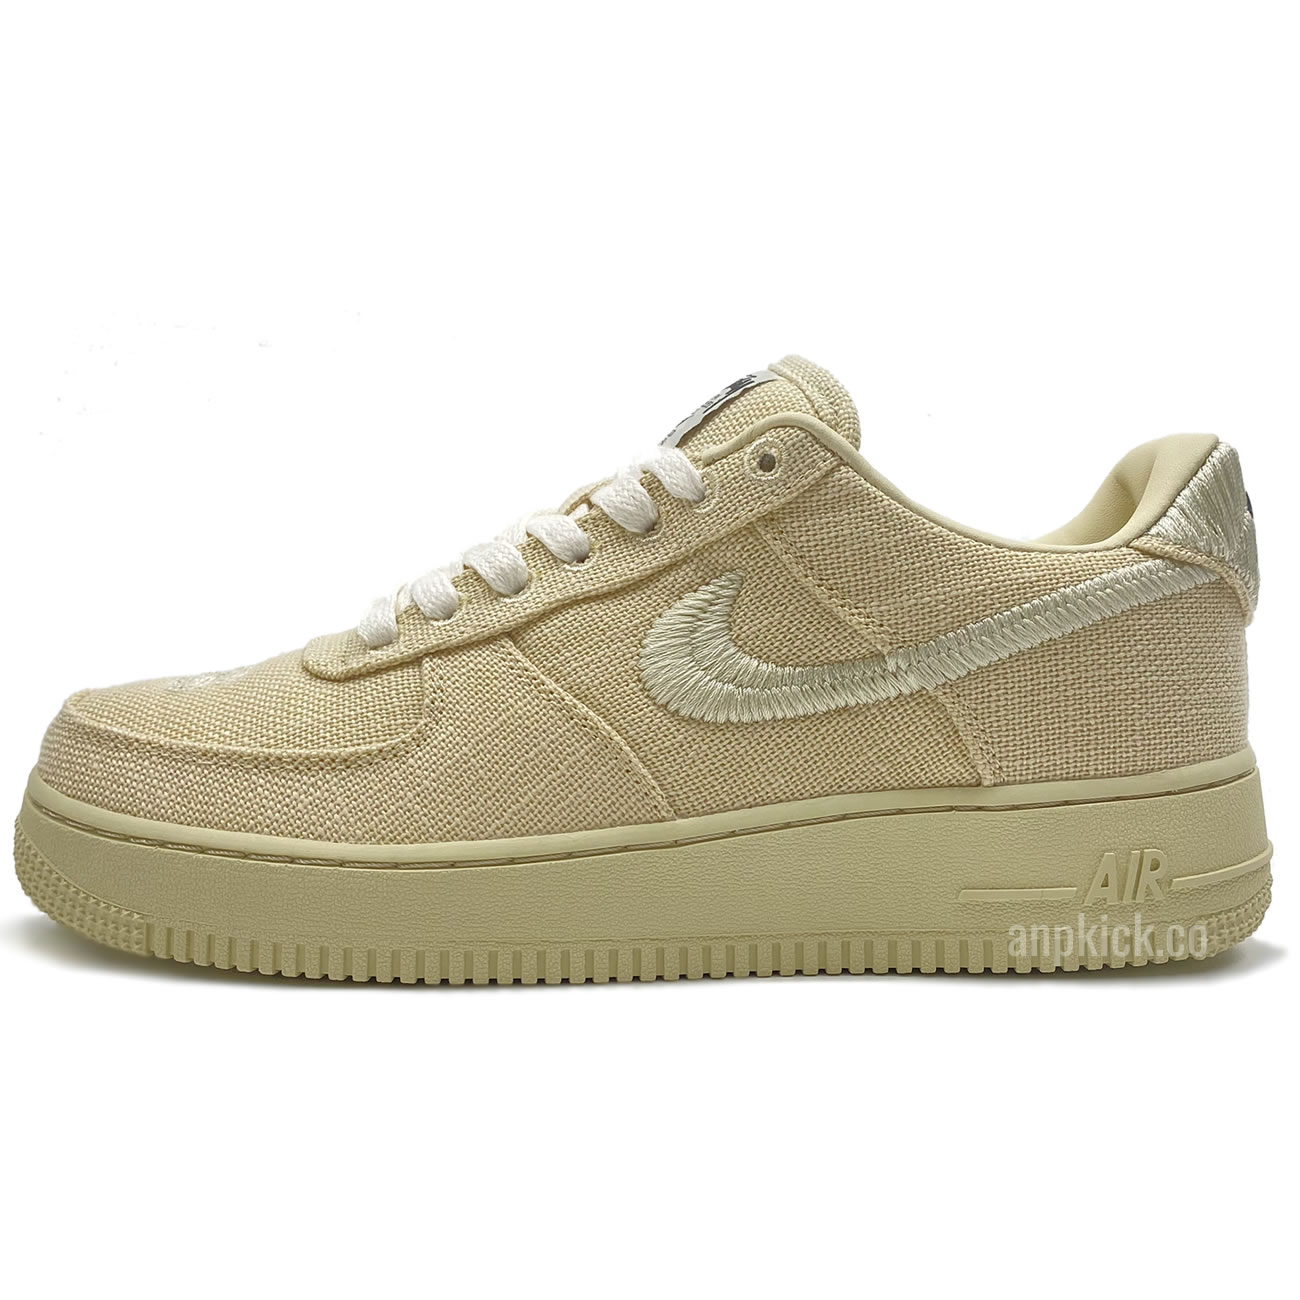 Stussy Nike Air Force 1 Low Fossil Stone Cz9084 200 Release Date (1) - newkick.org